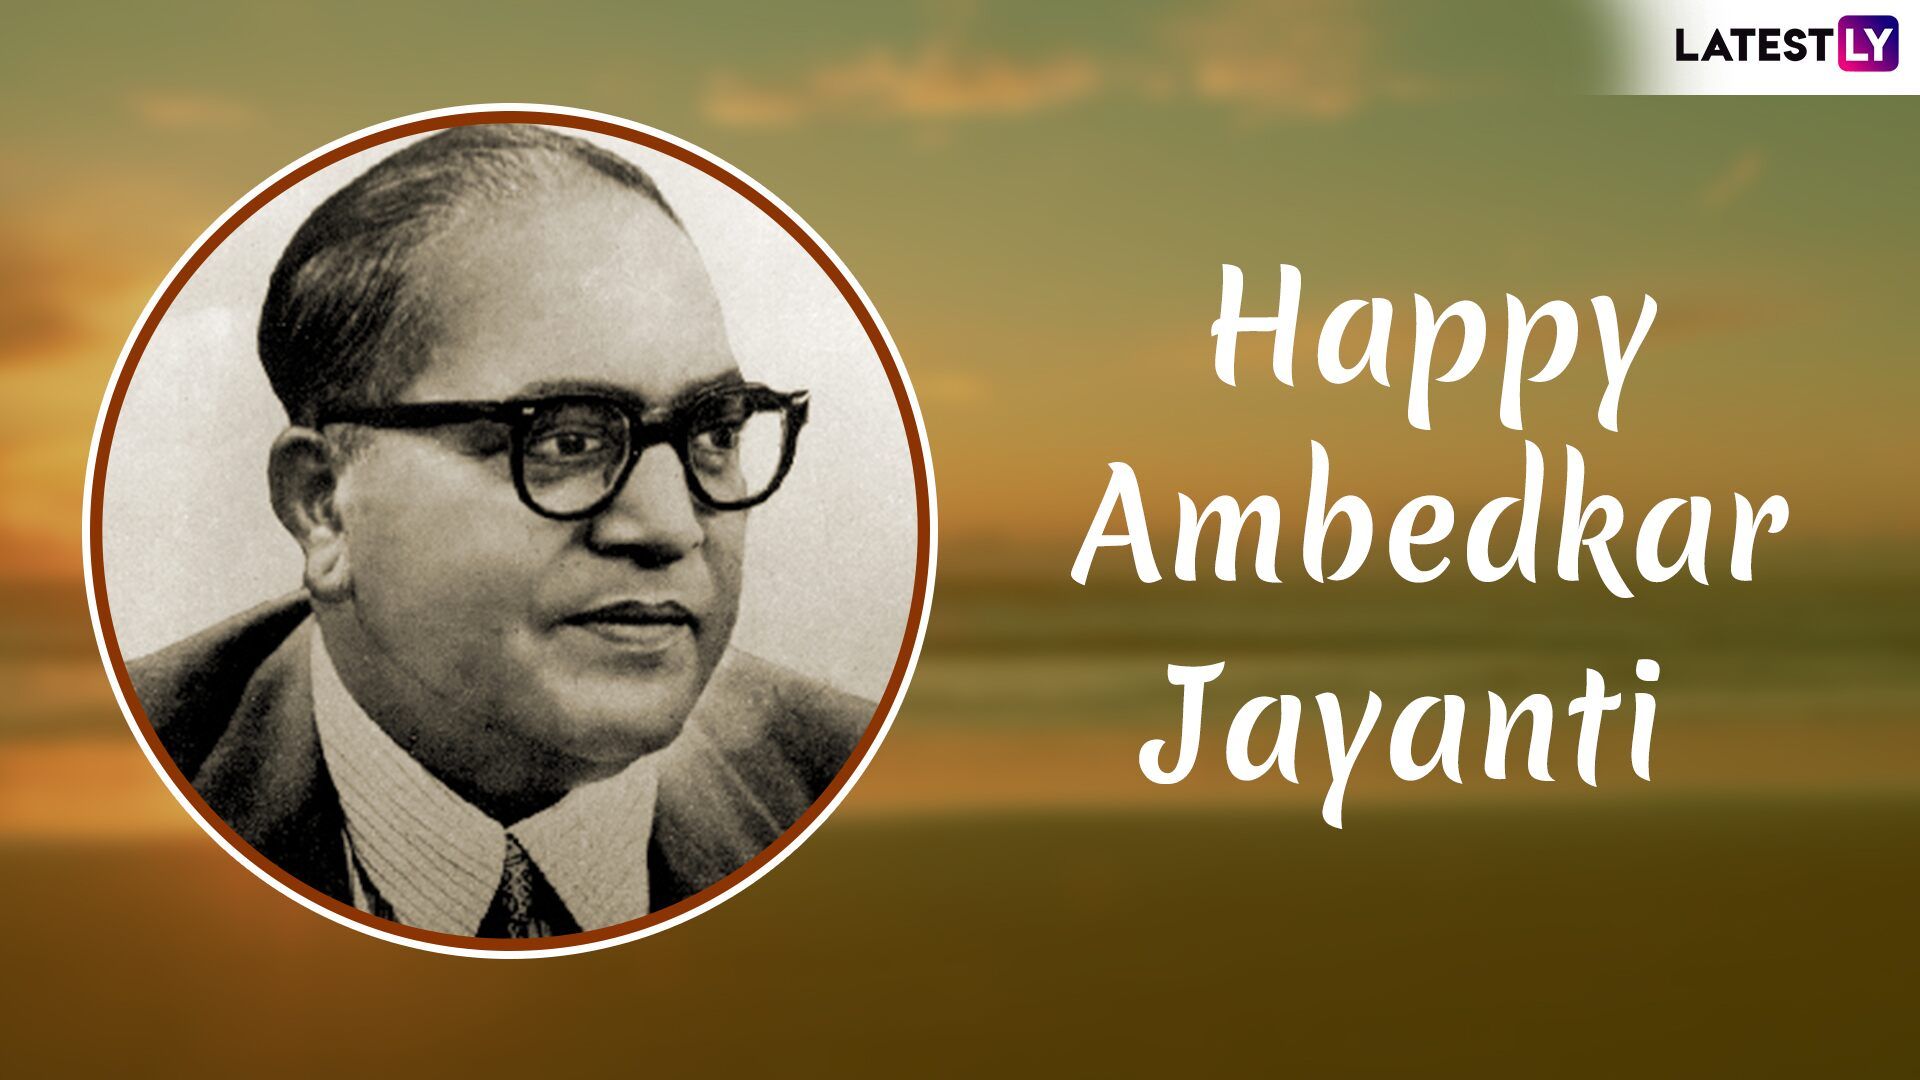 Ambedkar Jayanti 2019 Image With Quotes & HD Wallpaper for Free Download Online: Celebrate Dr Bhim Rao Ambedkar 128th Birth Anniversary With GIF Greetings & WhatsApp Sticker Messages